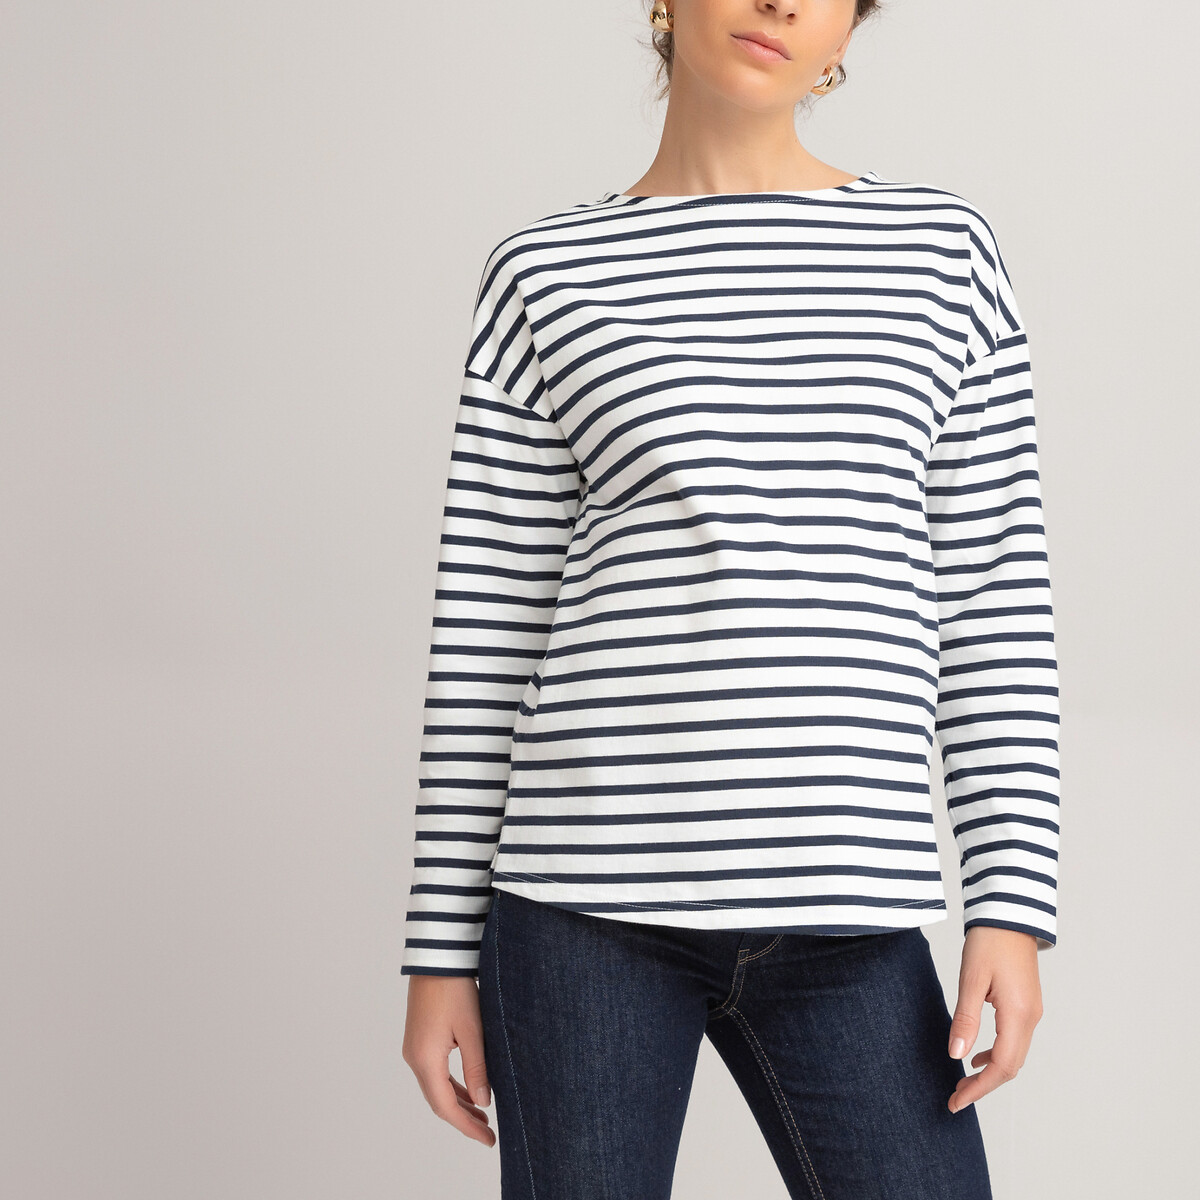 La Redoute Femme Vêtements Tops & T-shirts T-shirts Manches longues Made in France T-shirt TIGRE 